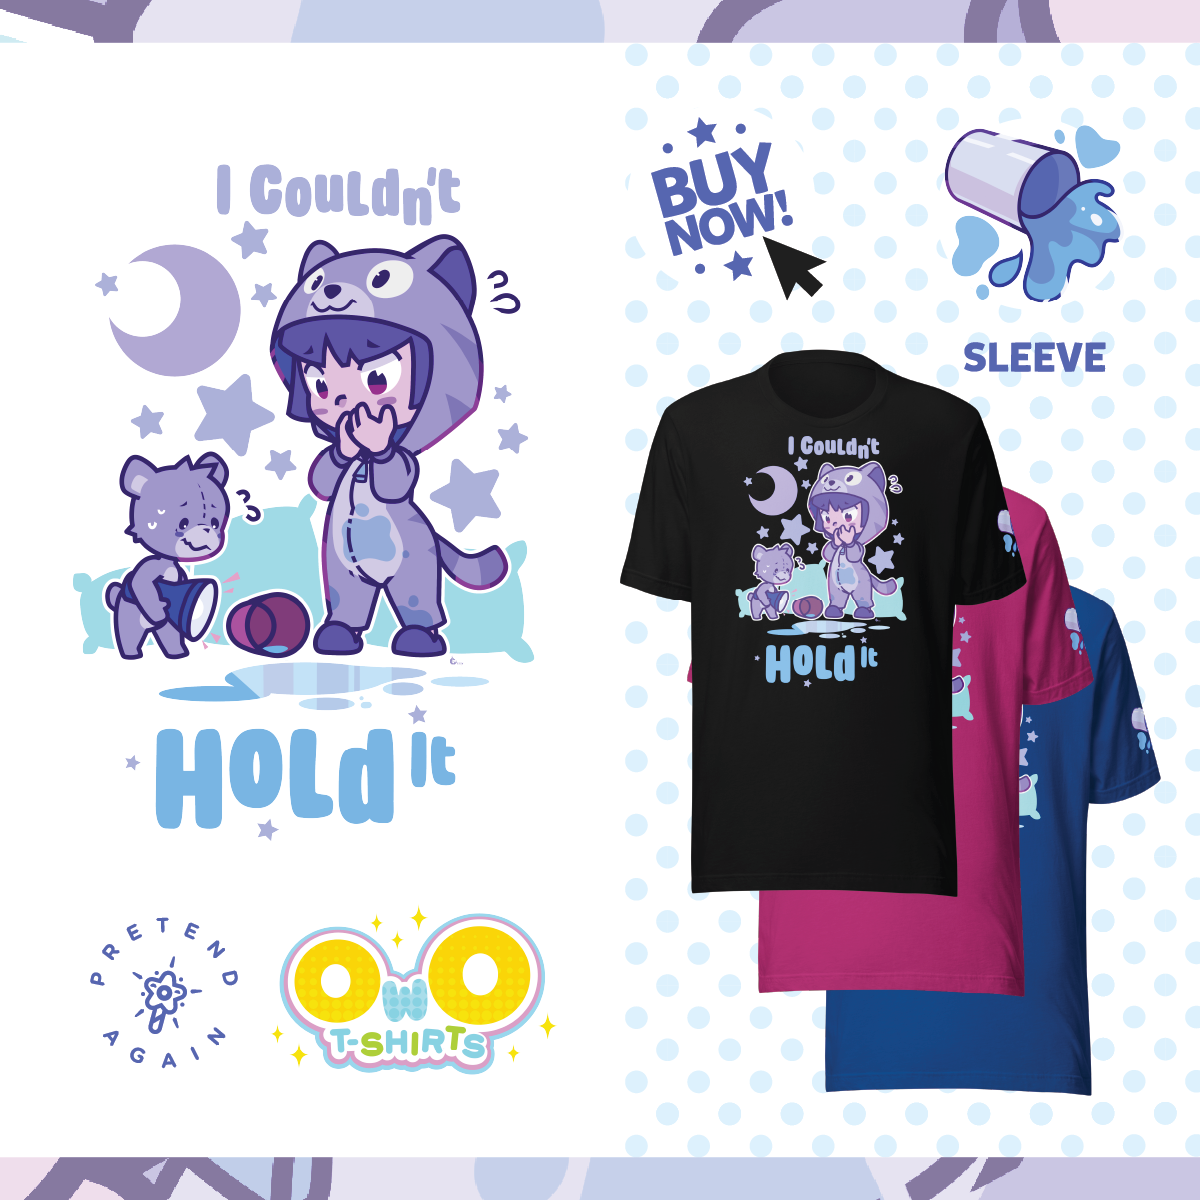 OwO - Couldn't Hold It! T-shirt